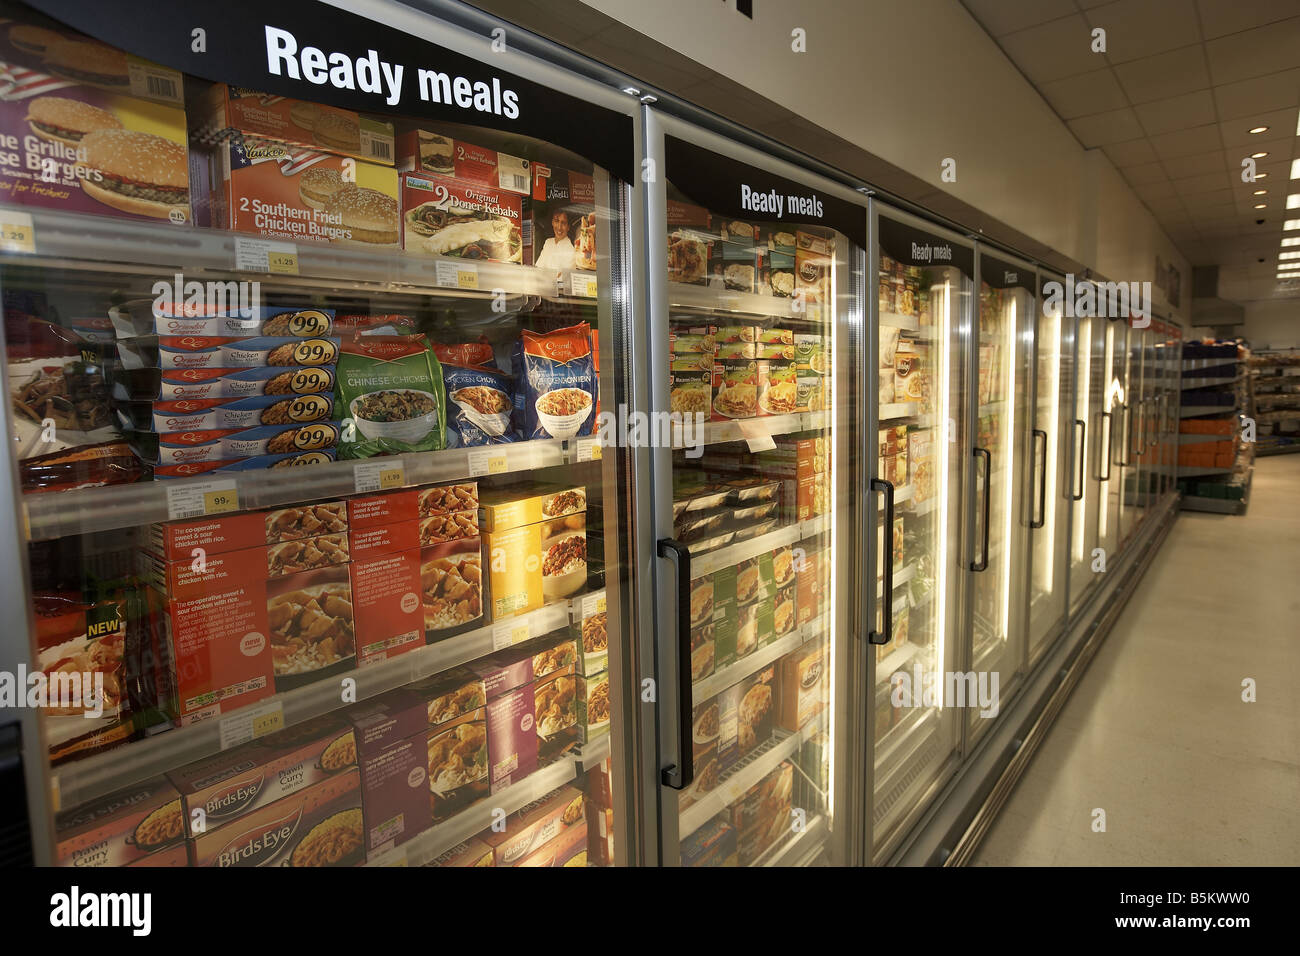 Ready meals in supermarket Stock Photo